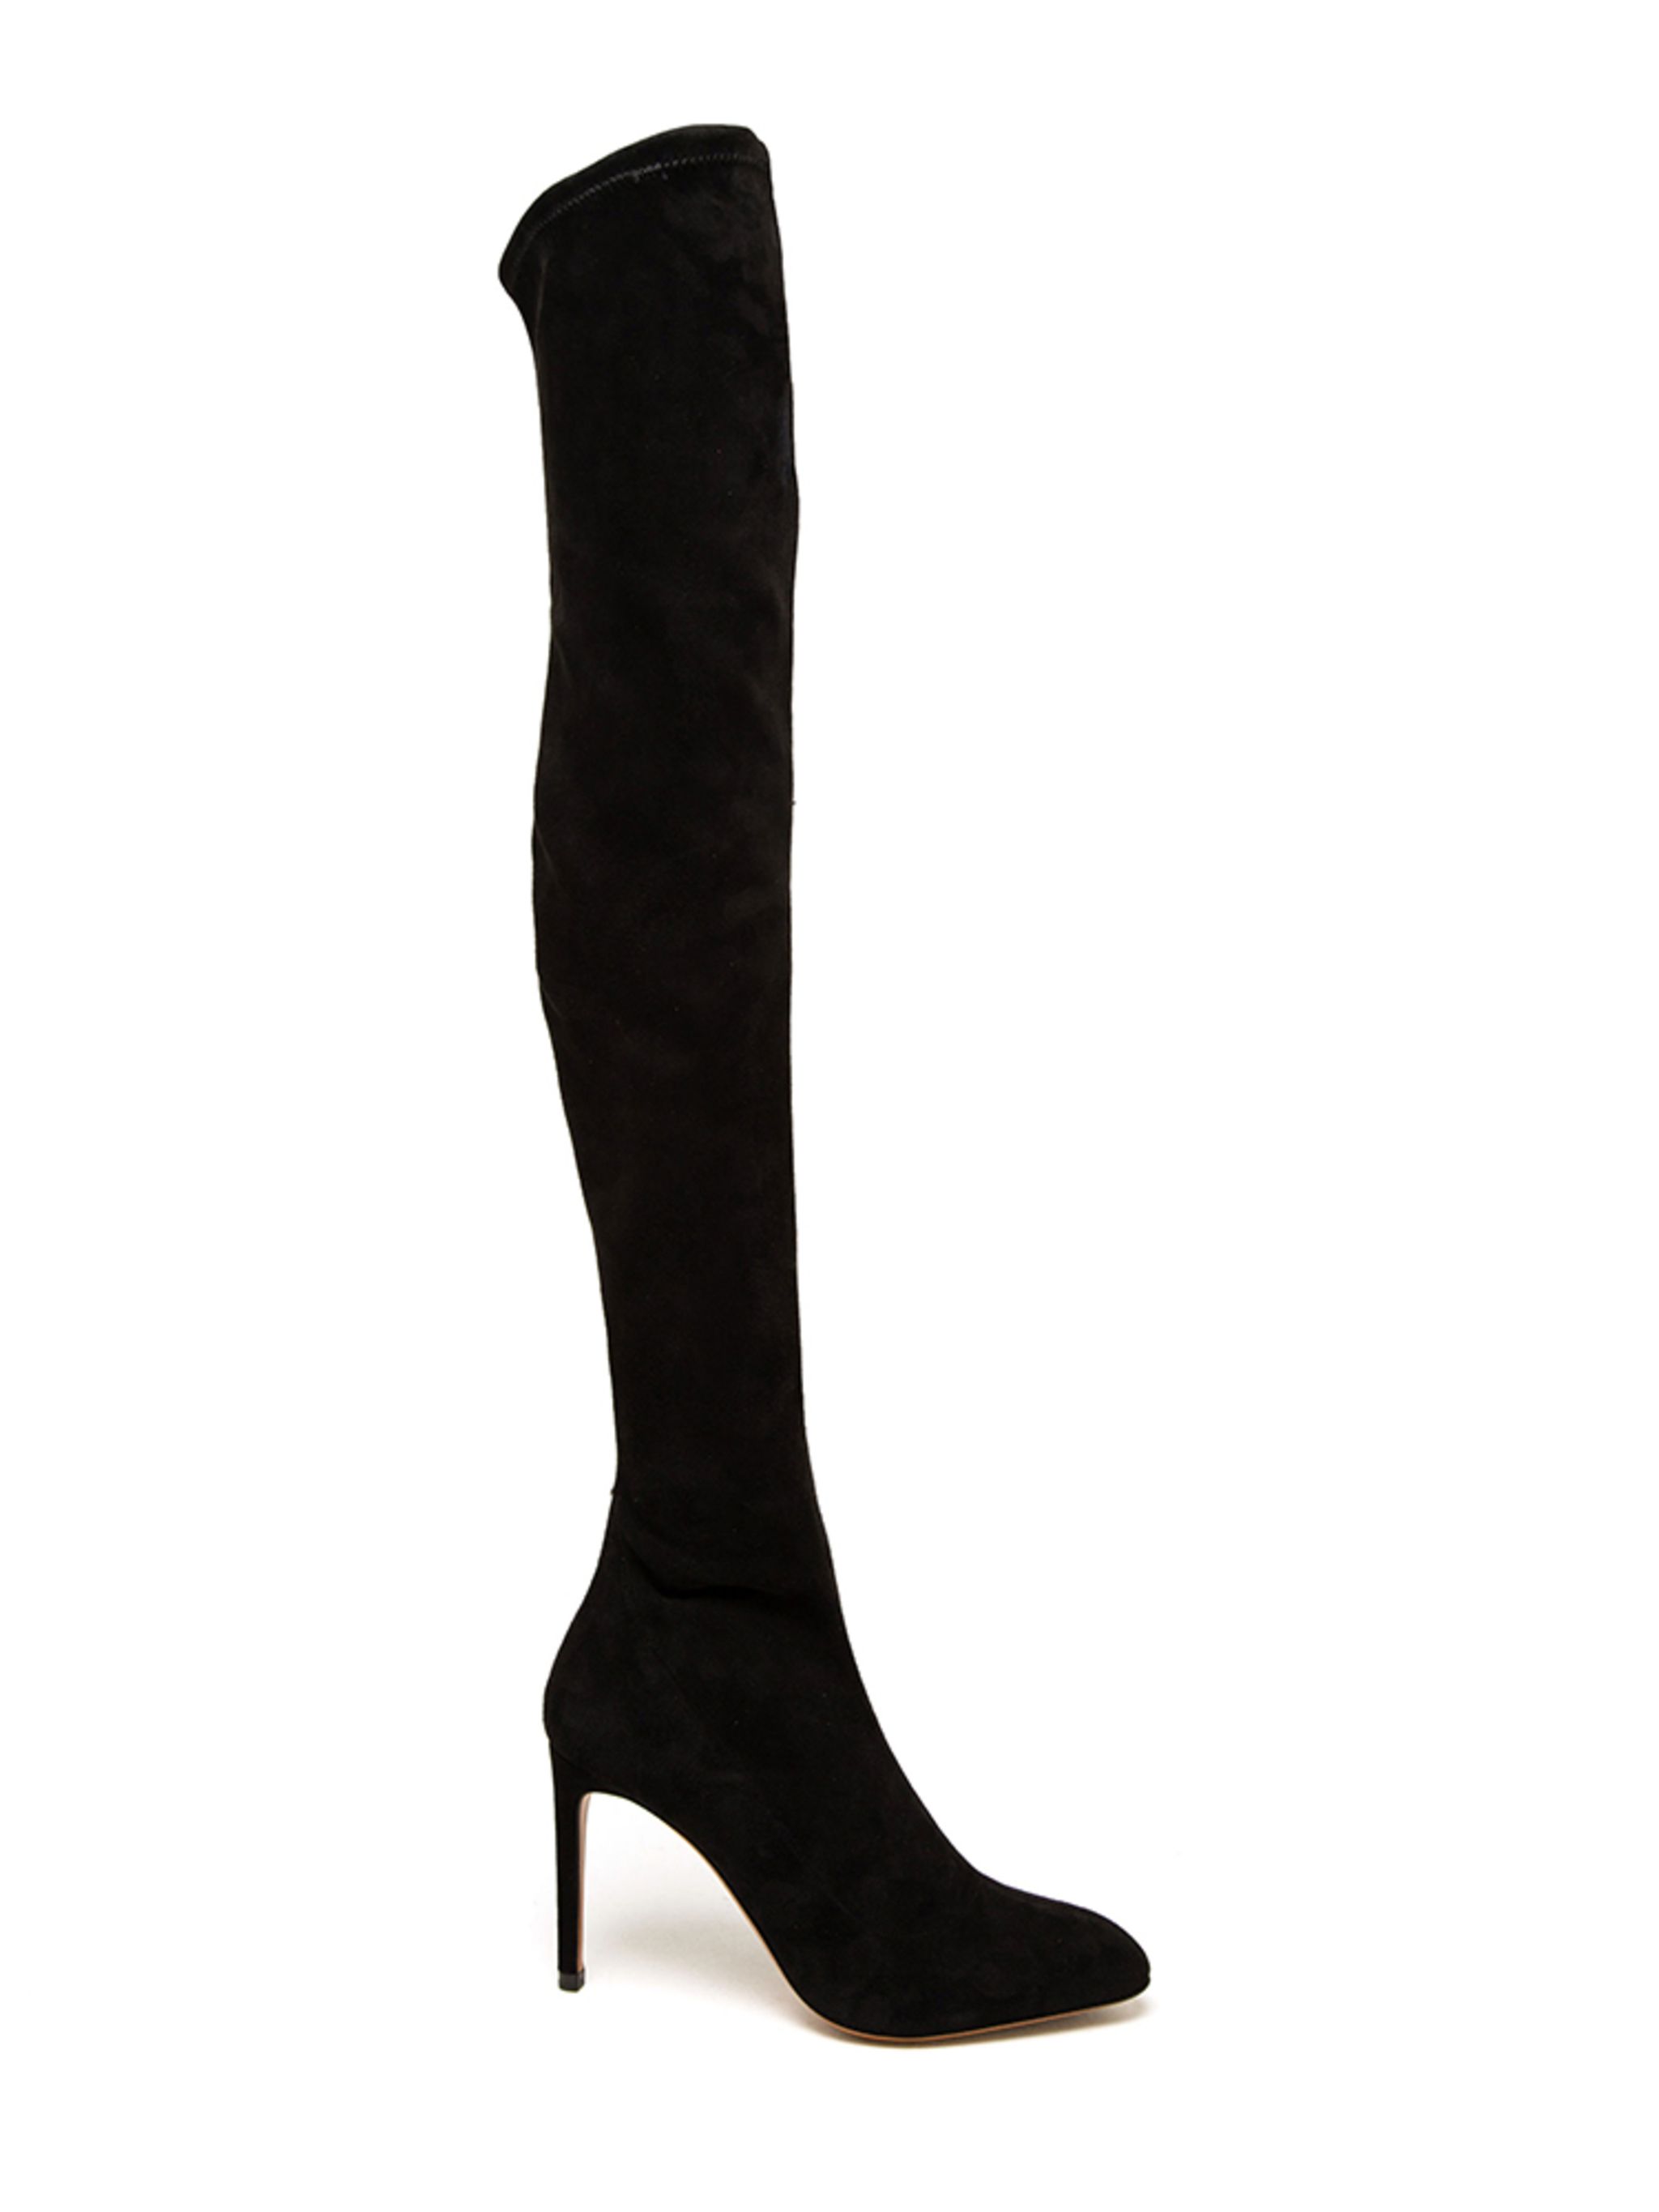 11 Pairs Of Thigh-High Boots That Are 